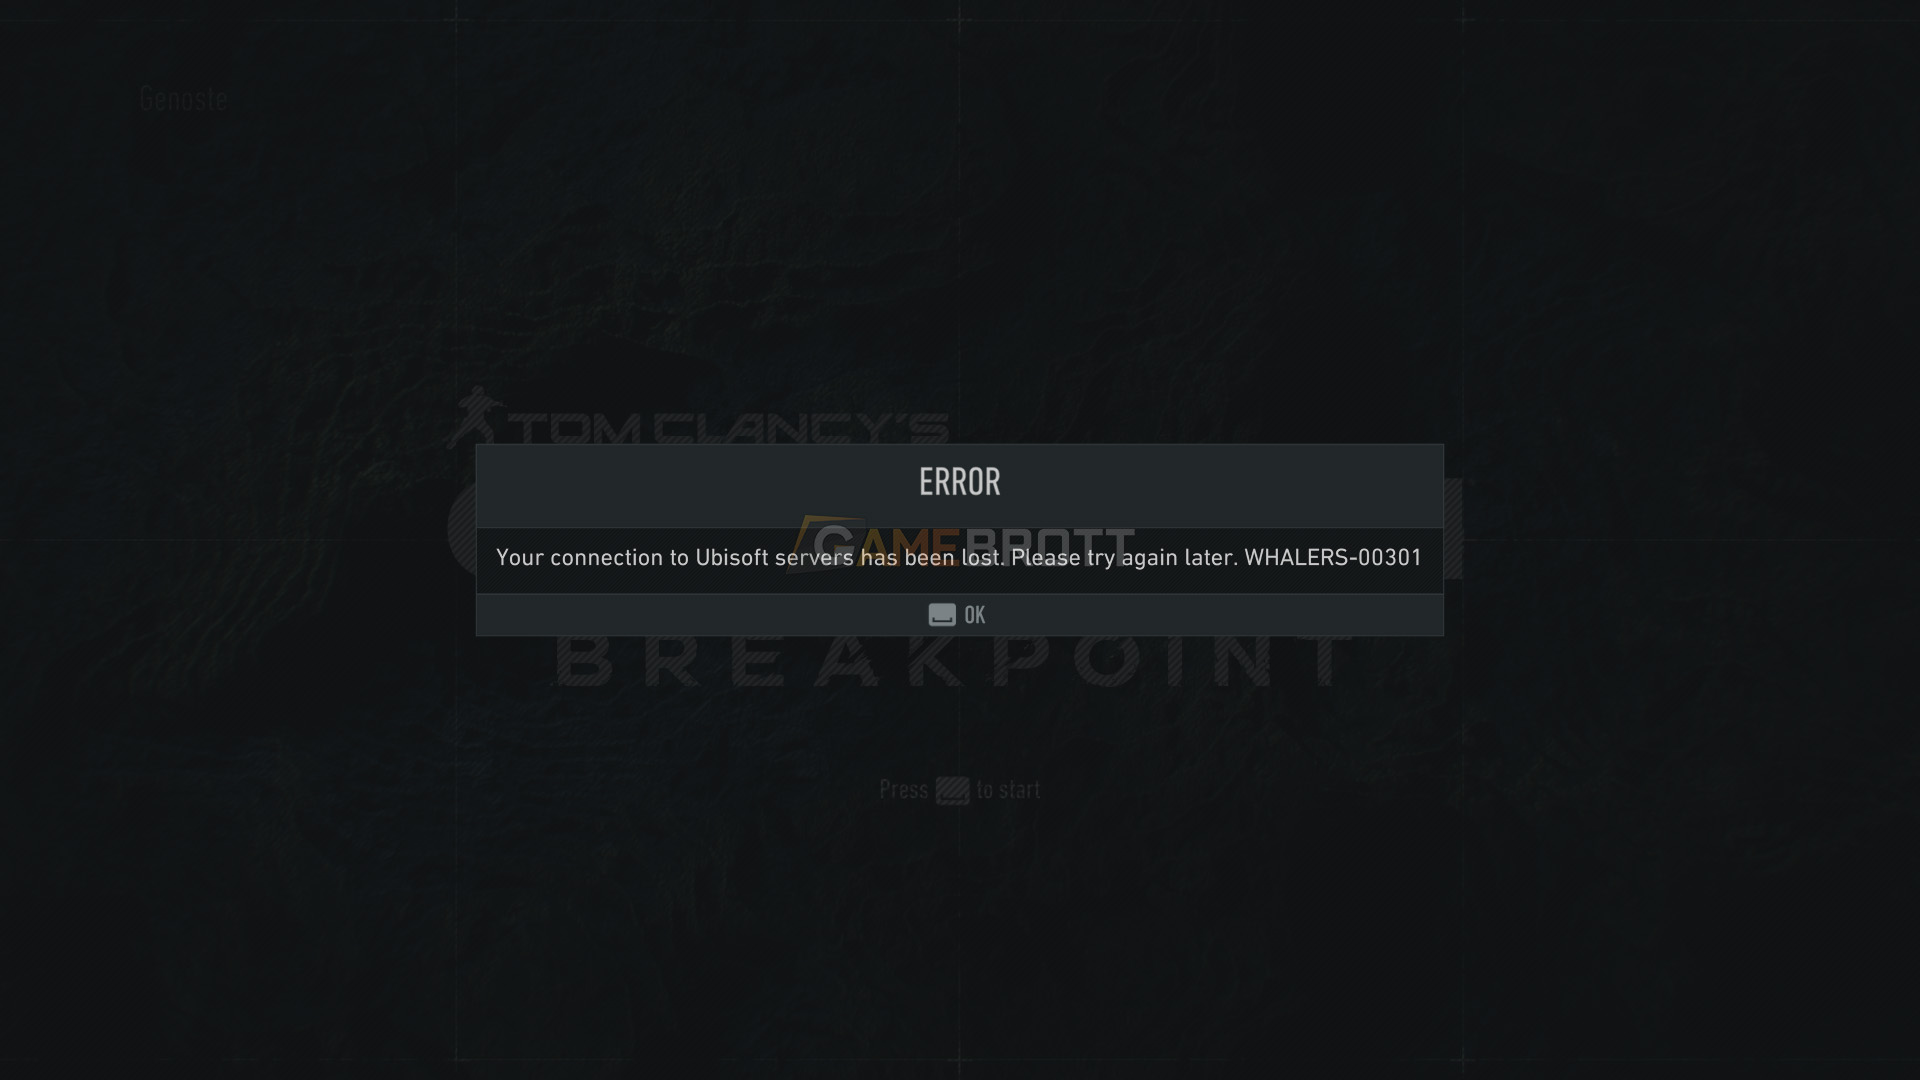 Tom Clancys Ghost Recon Breakpoint Screenshot 2019.10.08 20.50.26.11